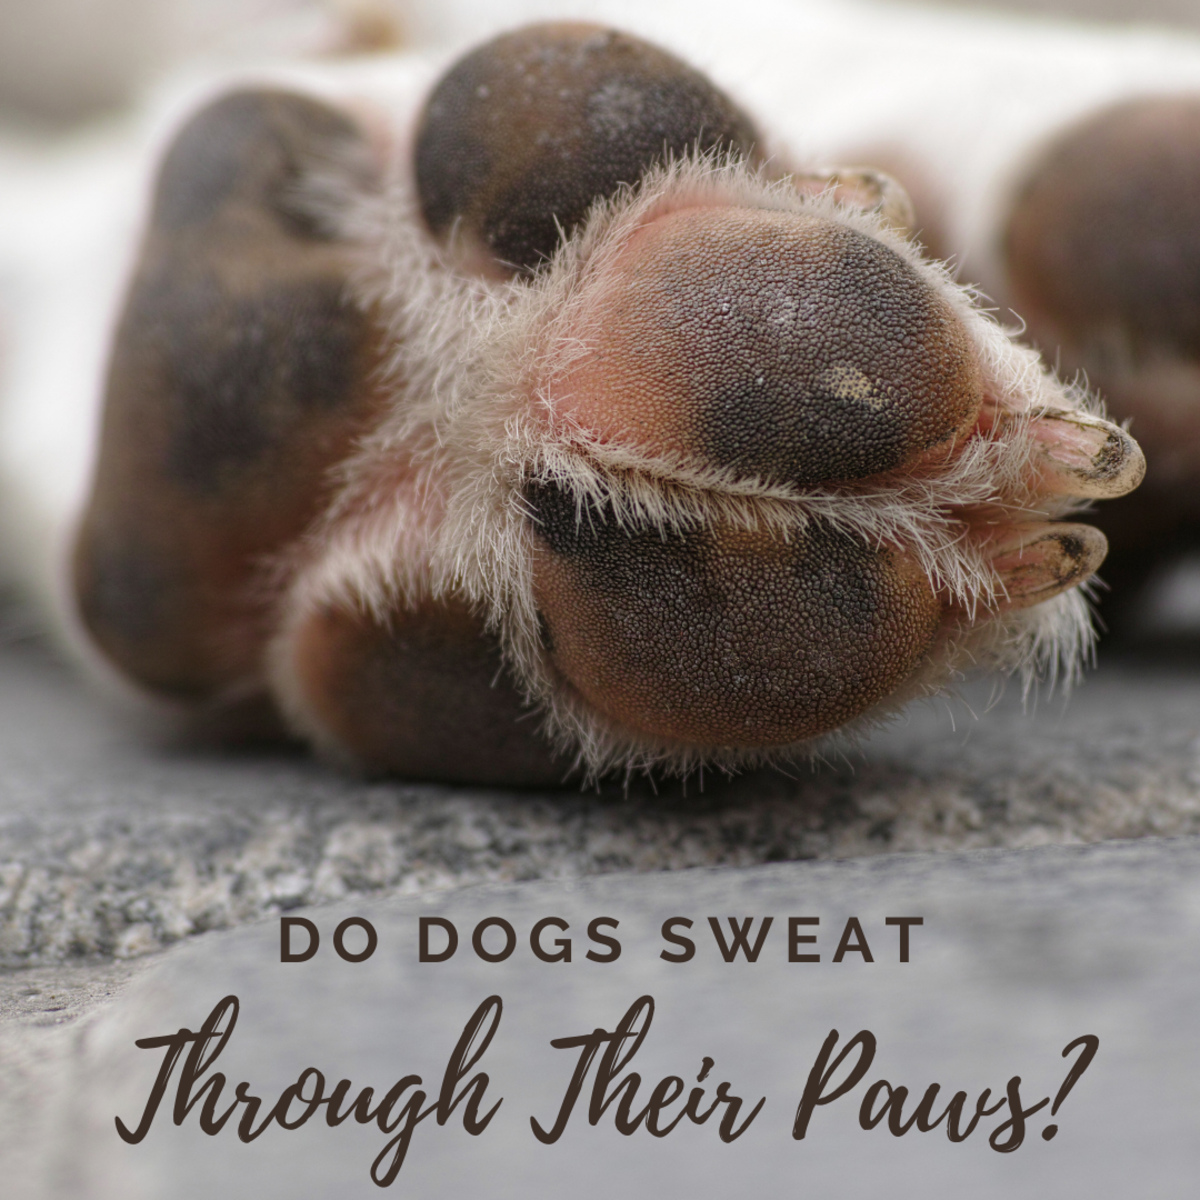 What does it mean when your dog has sweaty paws?